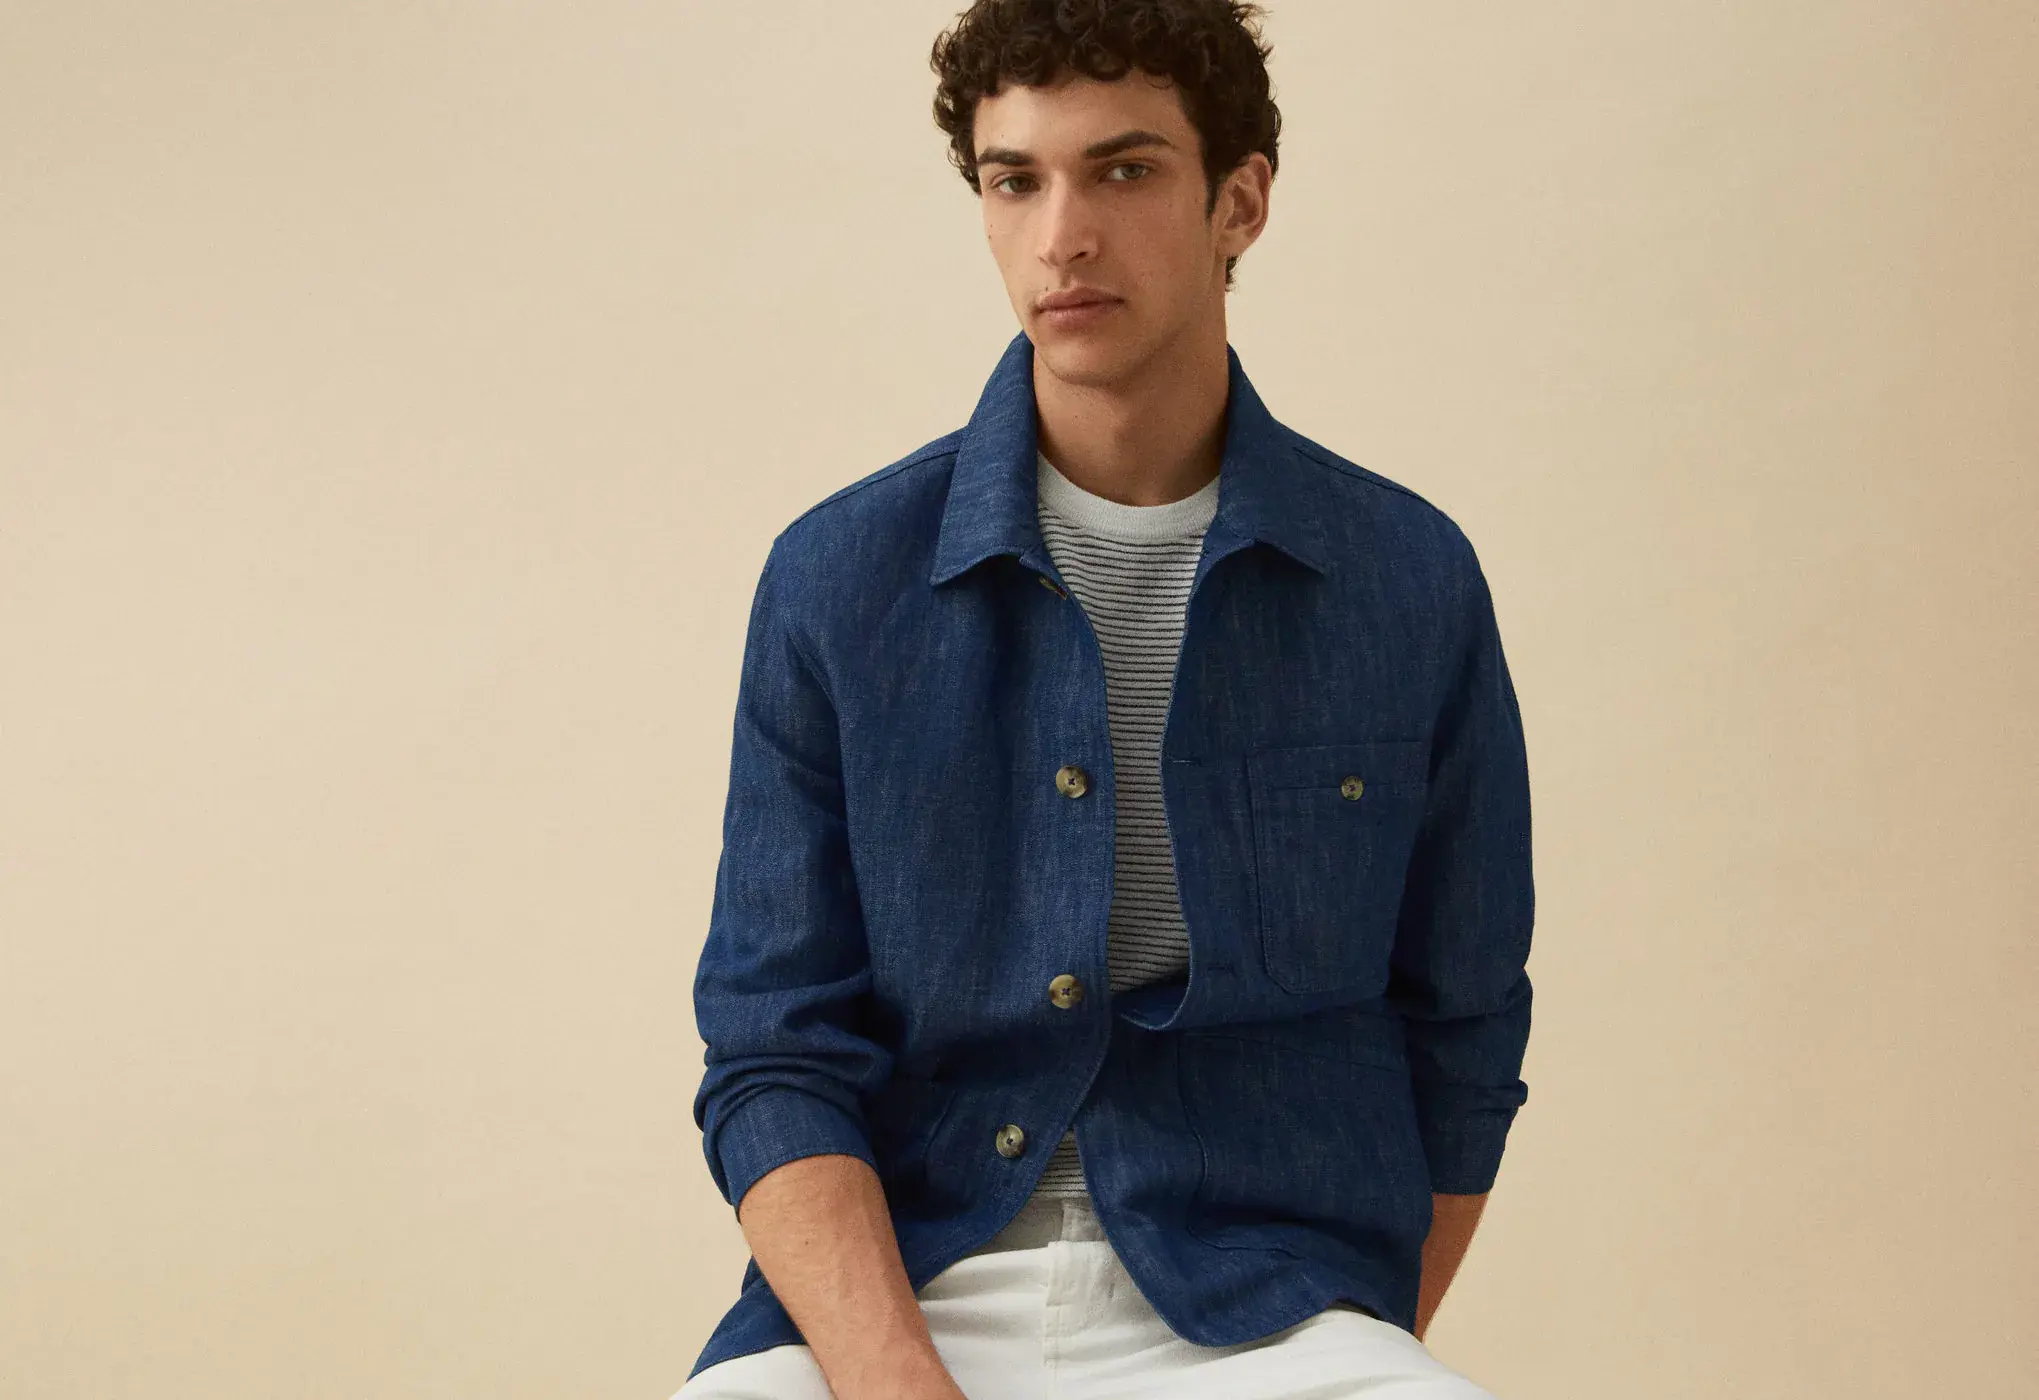 Mango Cotton-linen jacket with pockets. a young man wearing a blue shirt and white shirt. 